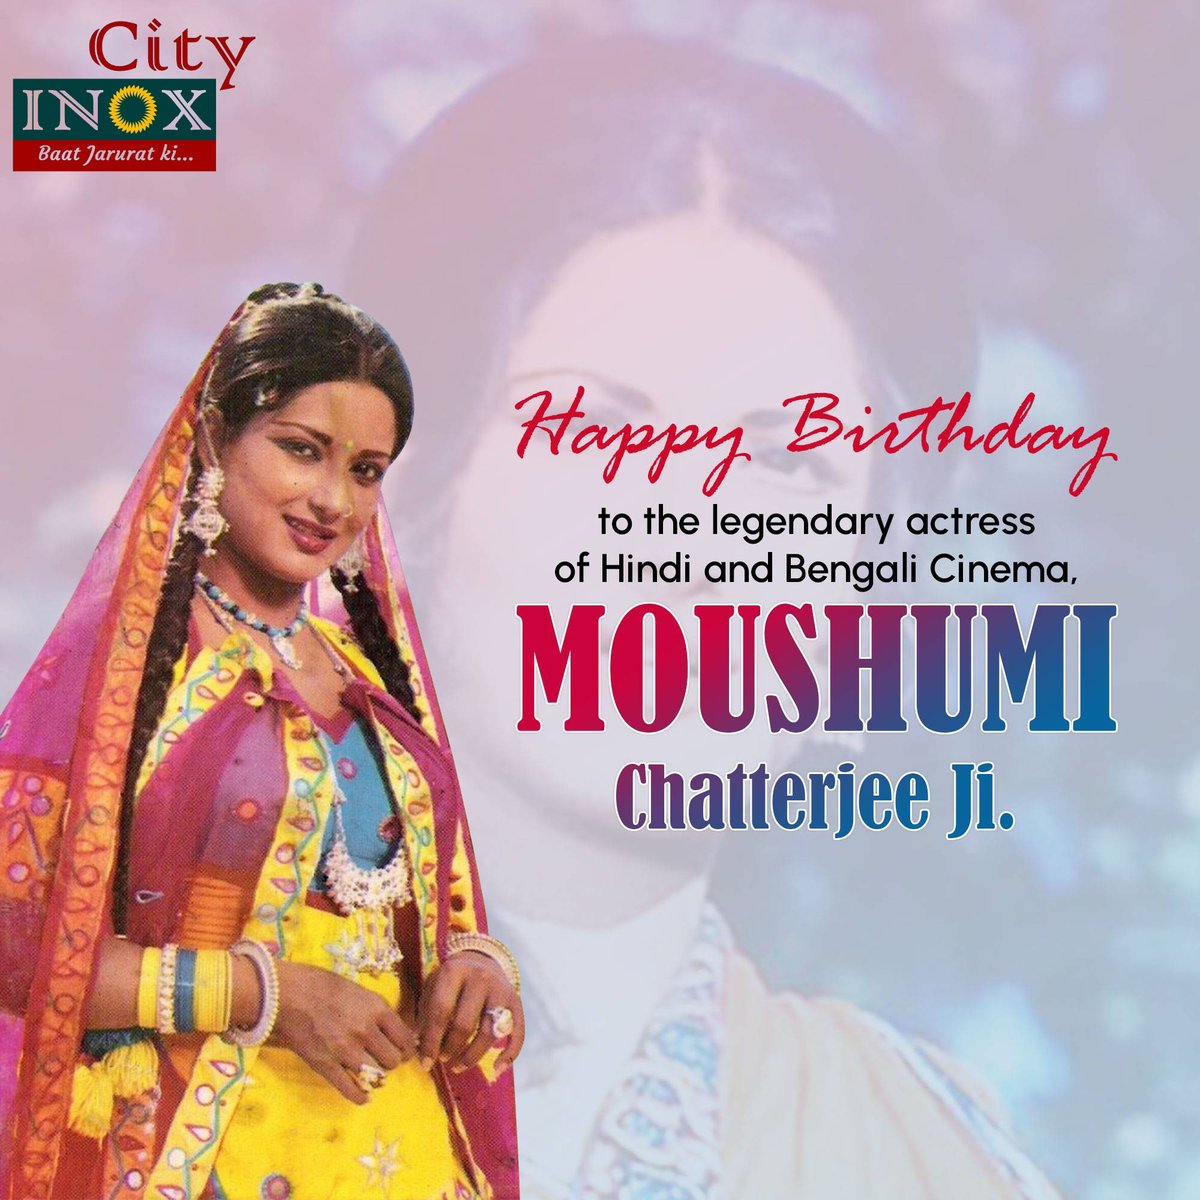 Moushumi Chatterjee is an Indian actress who is recognised for her work in Hindi and Bengali cinema. She was one of the highest paid actresses in Hindi films during the 1970s.

#moushumiChatterjee #HappyBirthday